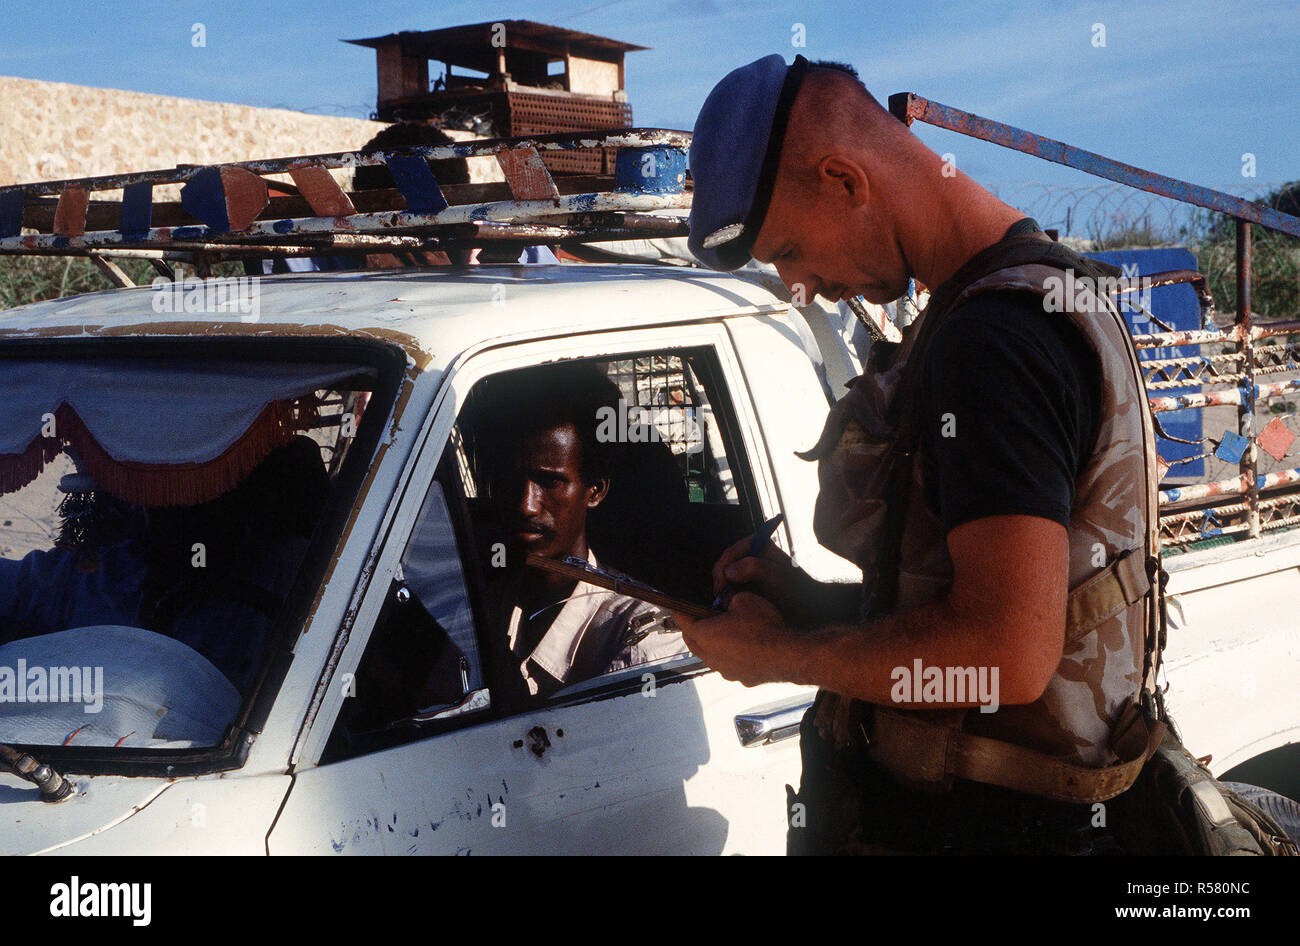 1993 - A Belgian soldier performs a security check on a vehicle trying to enter the compound in Kismayo.  The Belgian contingent is part of the United Nations Forces in Somalia in support of OPERATION CONTINUE HOPE. Stock Photo